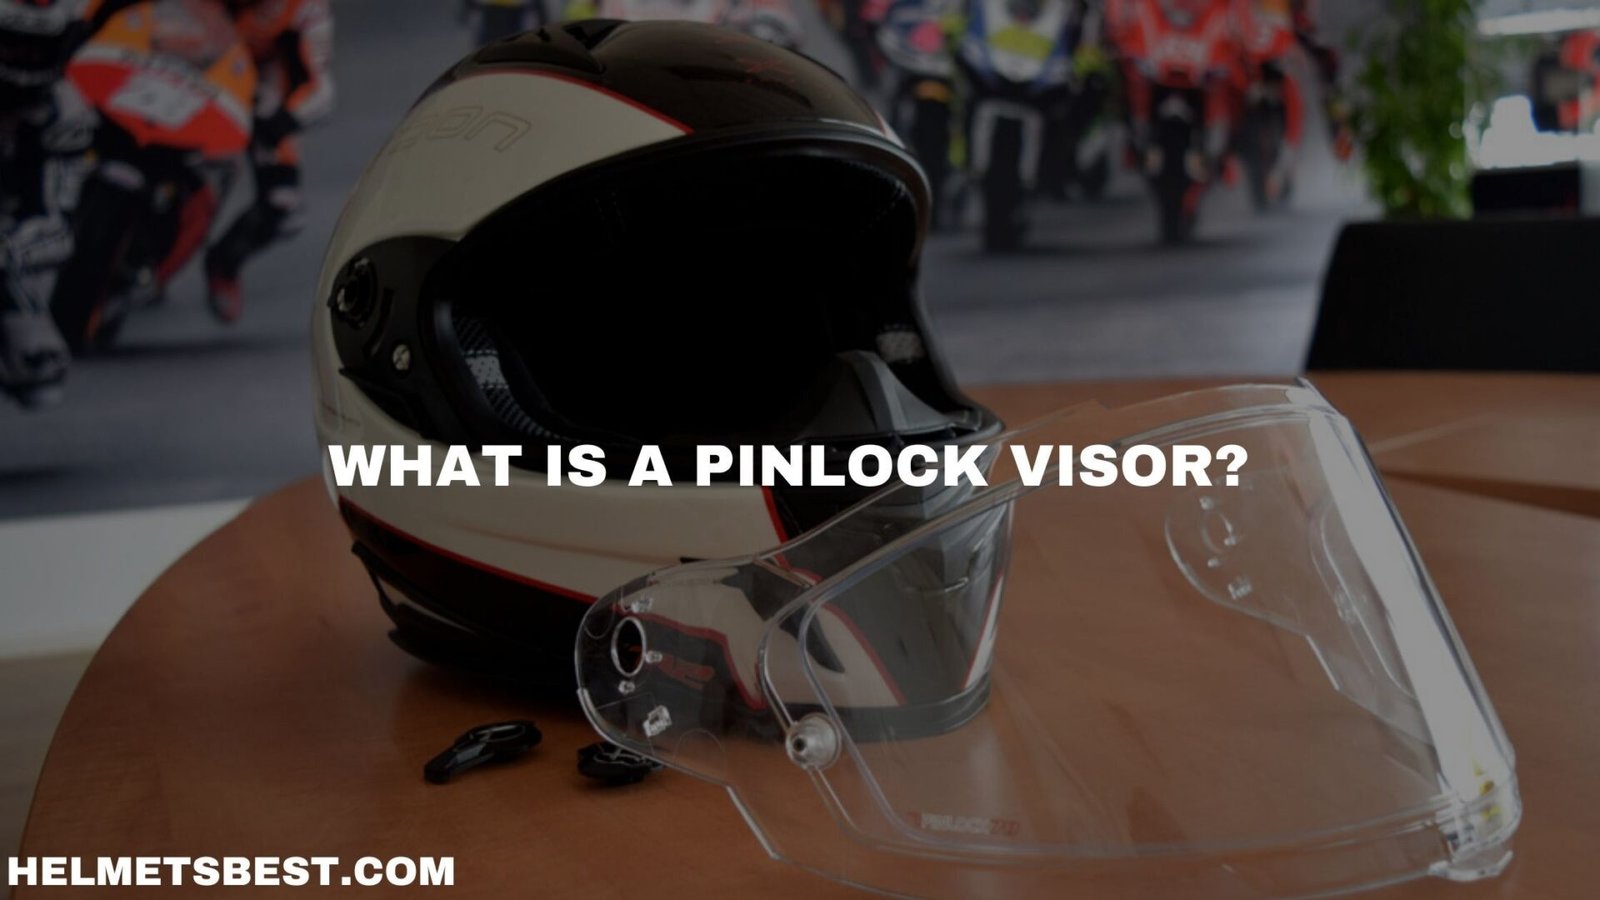 What is a Pinlock visor